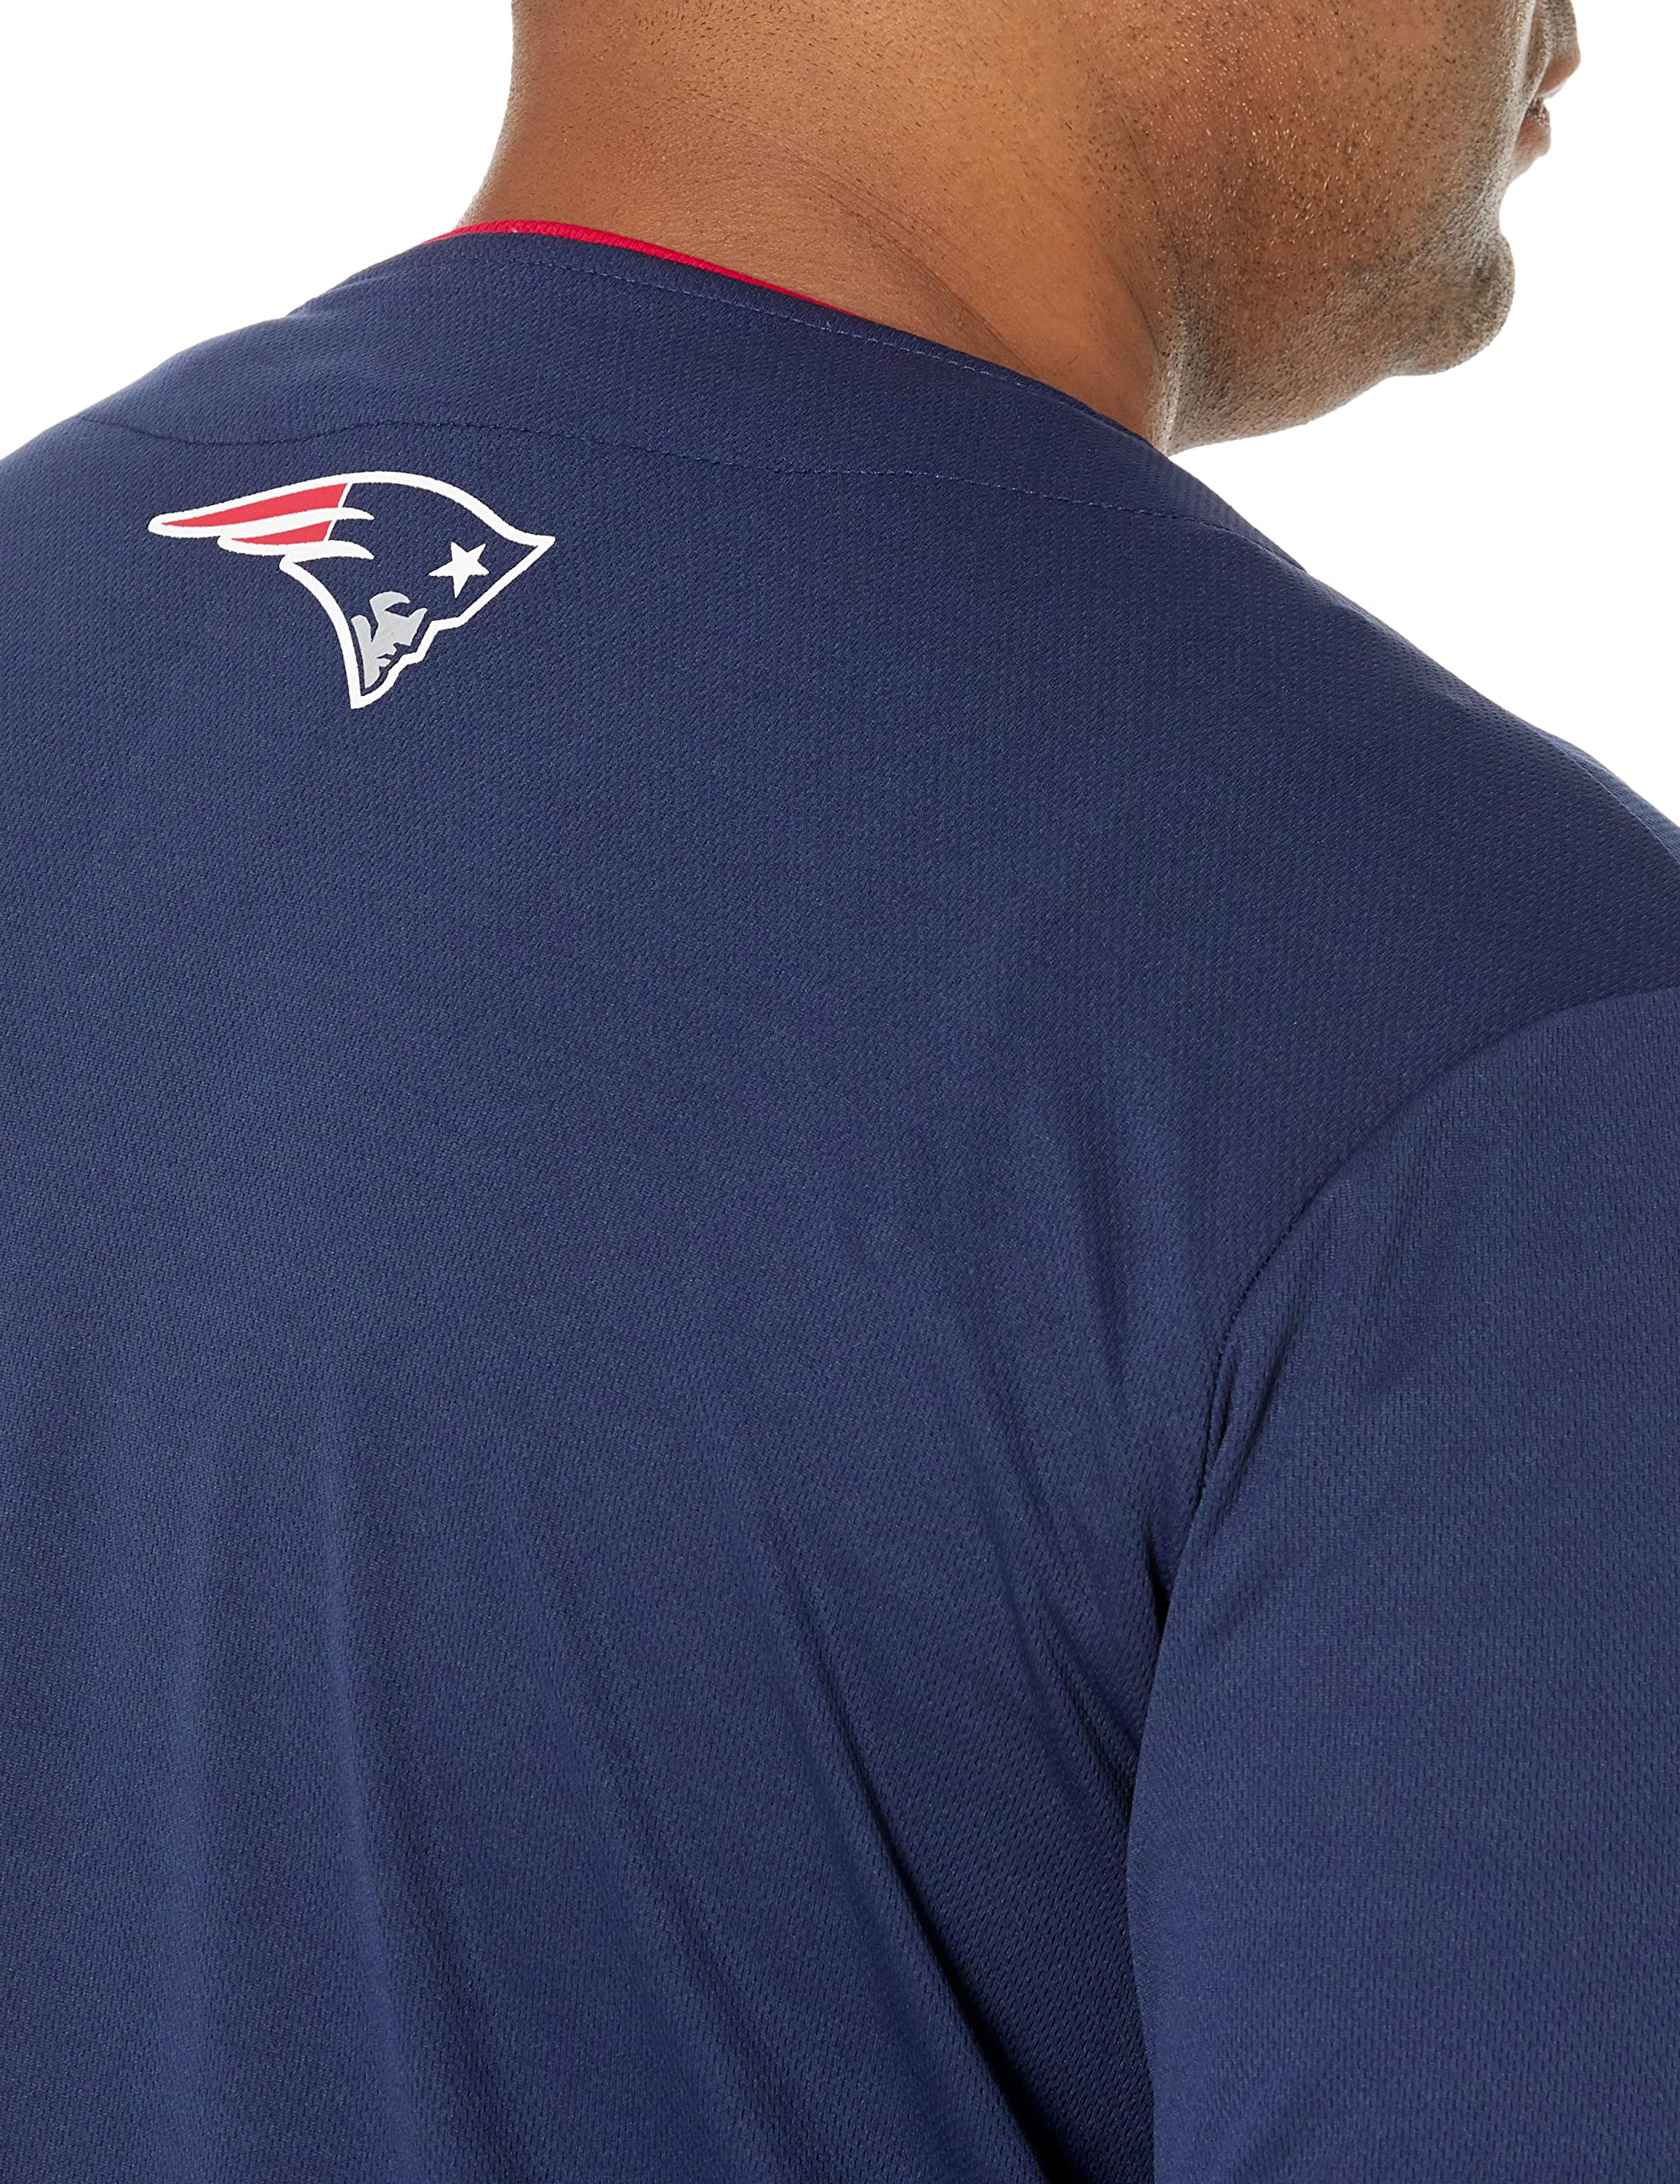 Ultra Game NFL New England Patriots Mens Game Day Button Down Baseball Mesh Jersey Shirt|New England Patriots